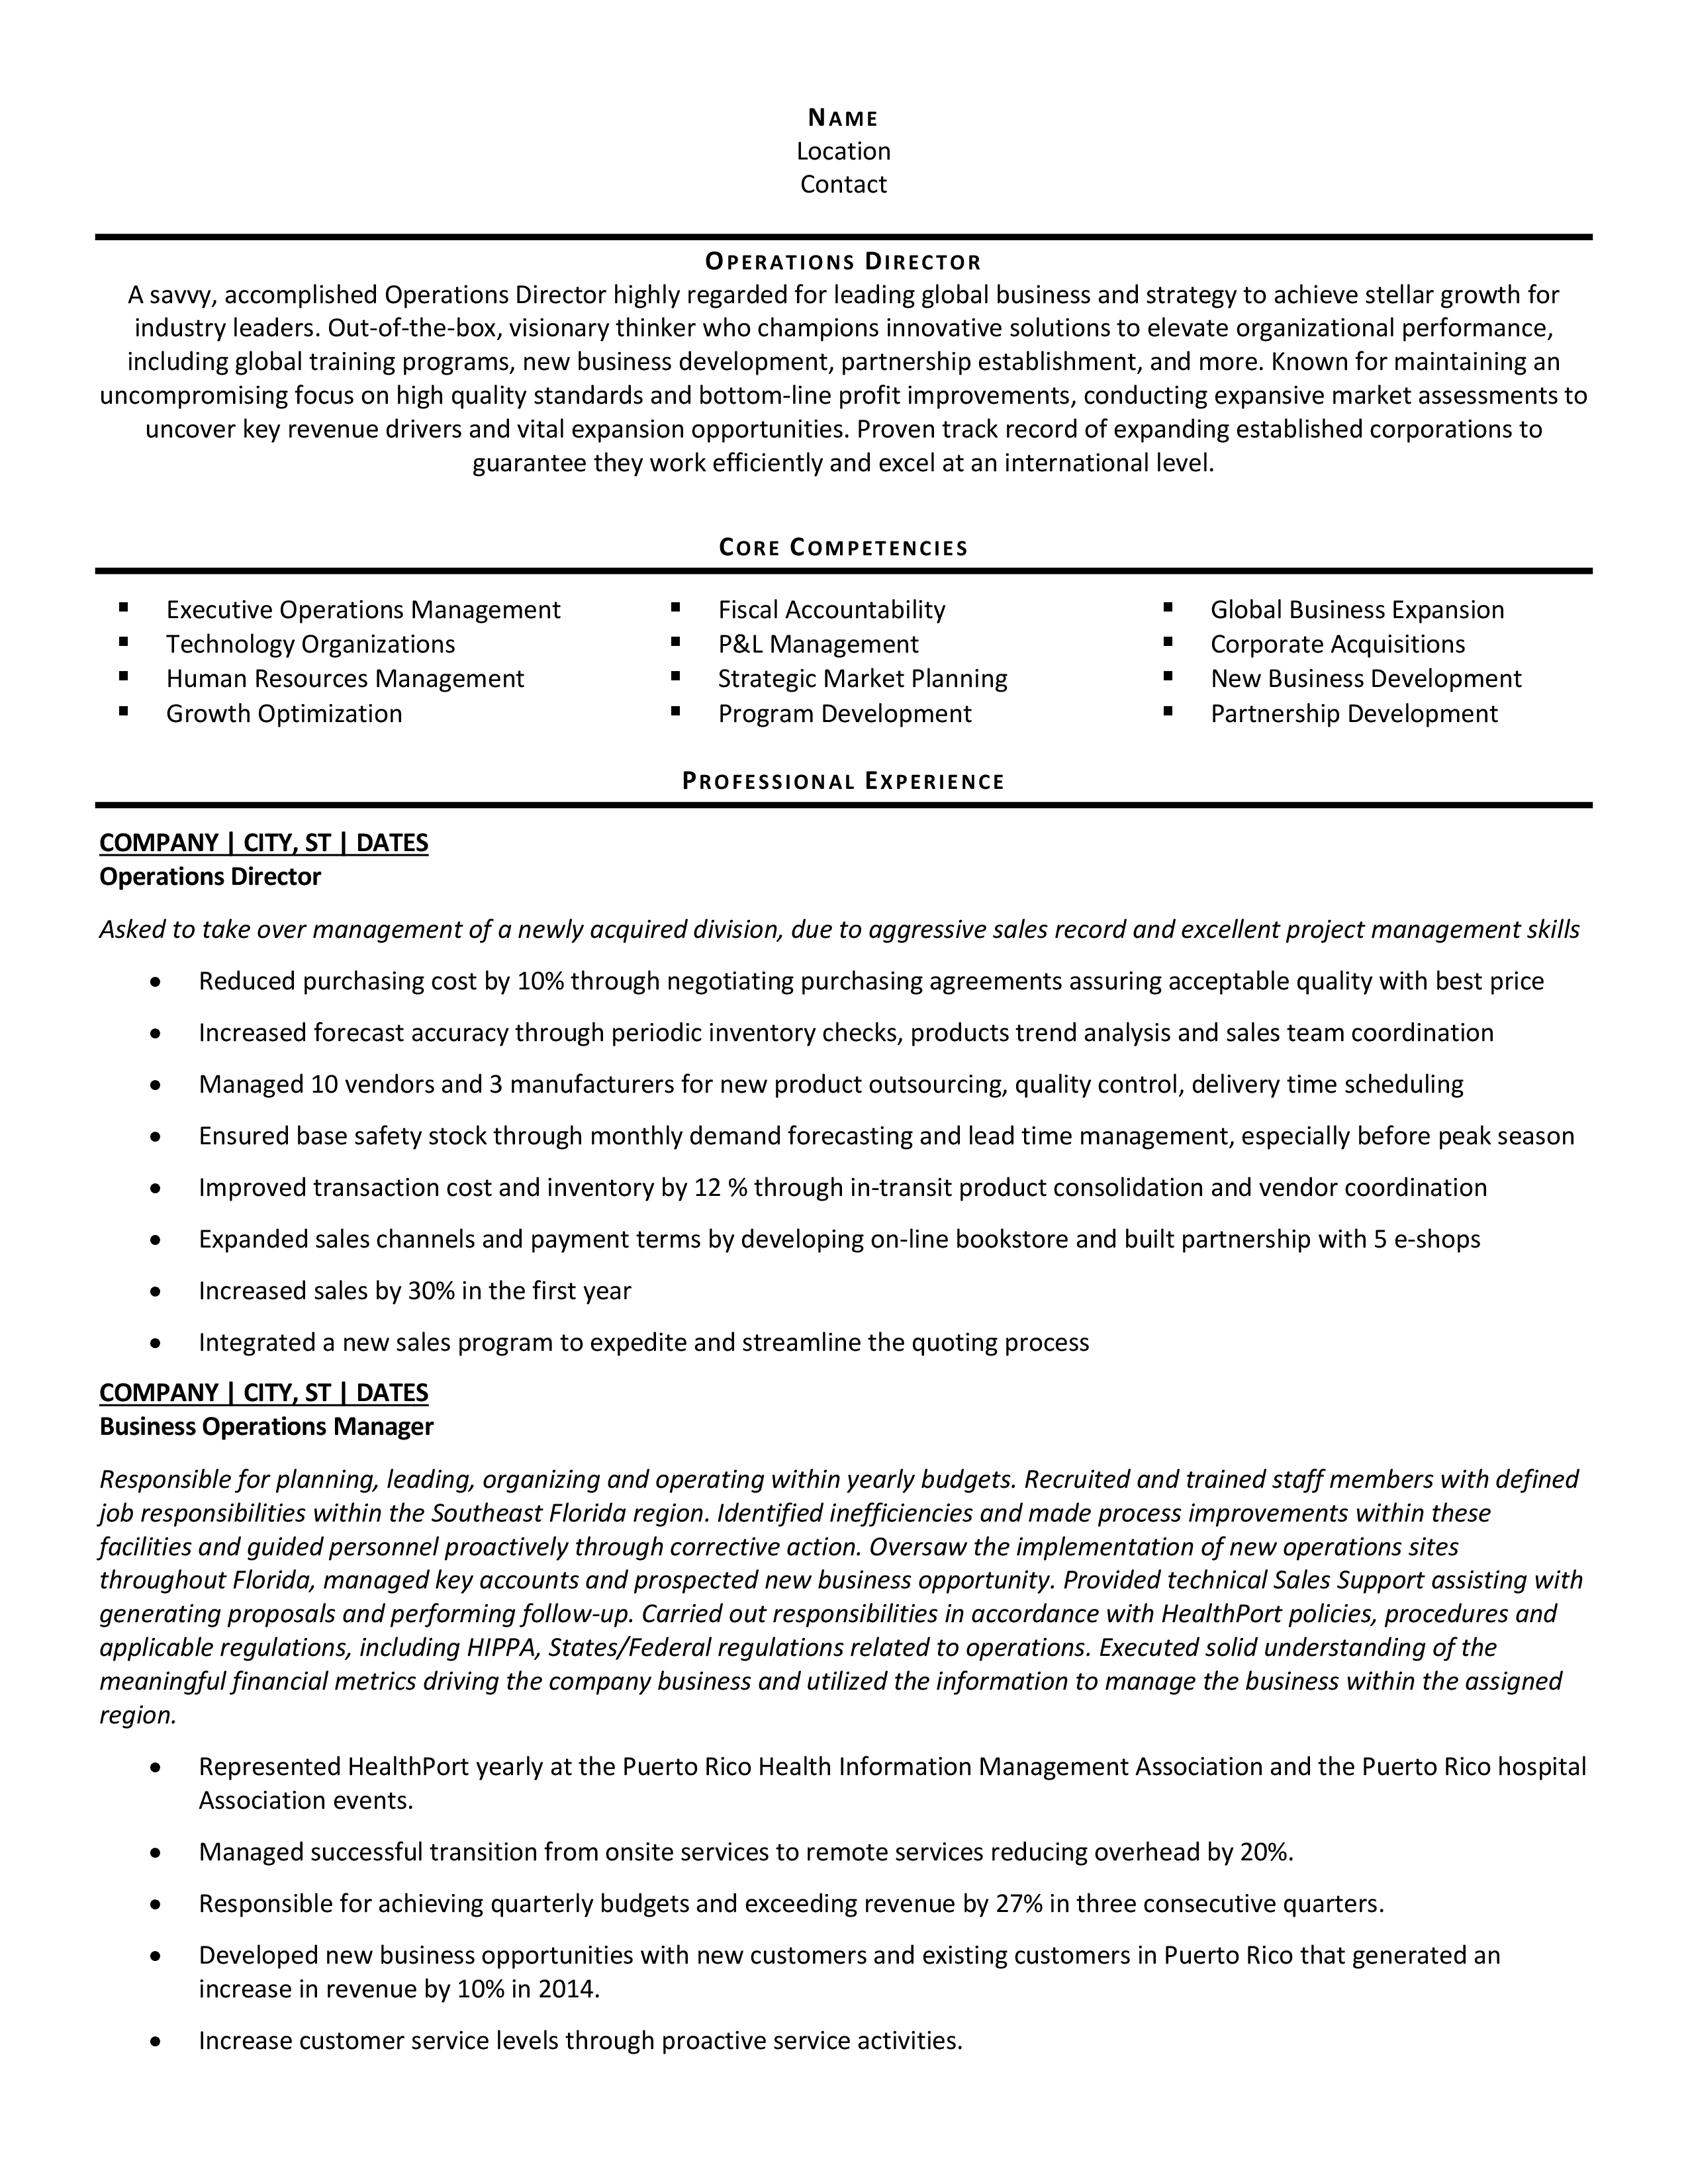 Operations Director Resume Example & Guide (2021) | ZipJob